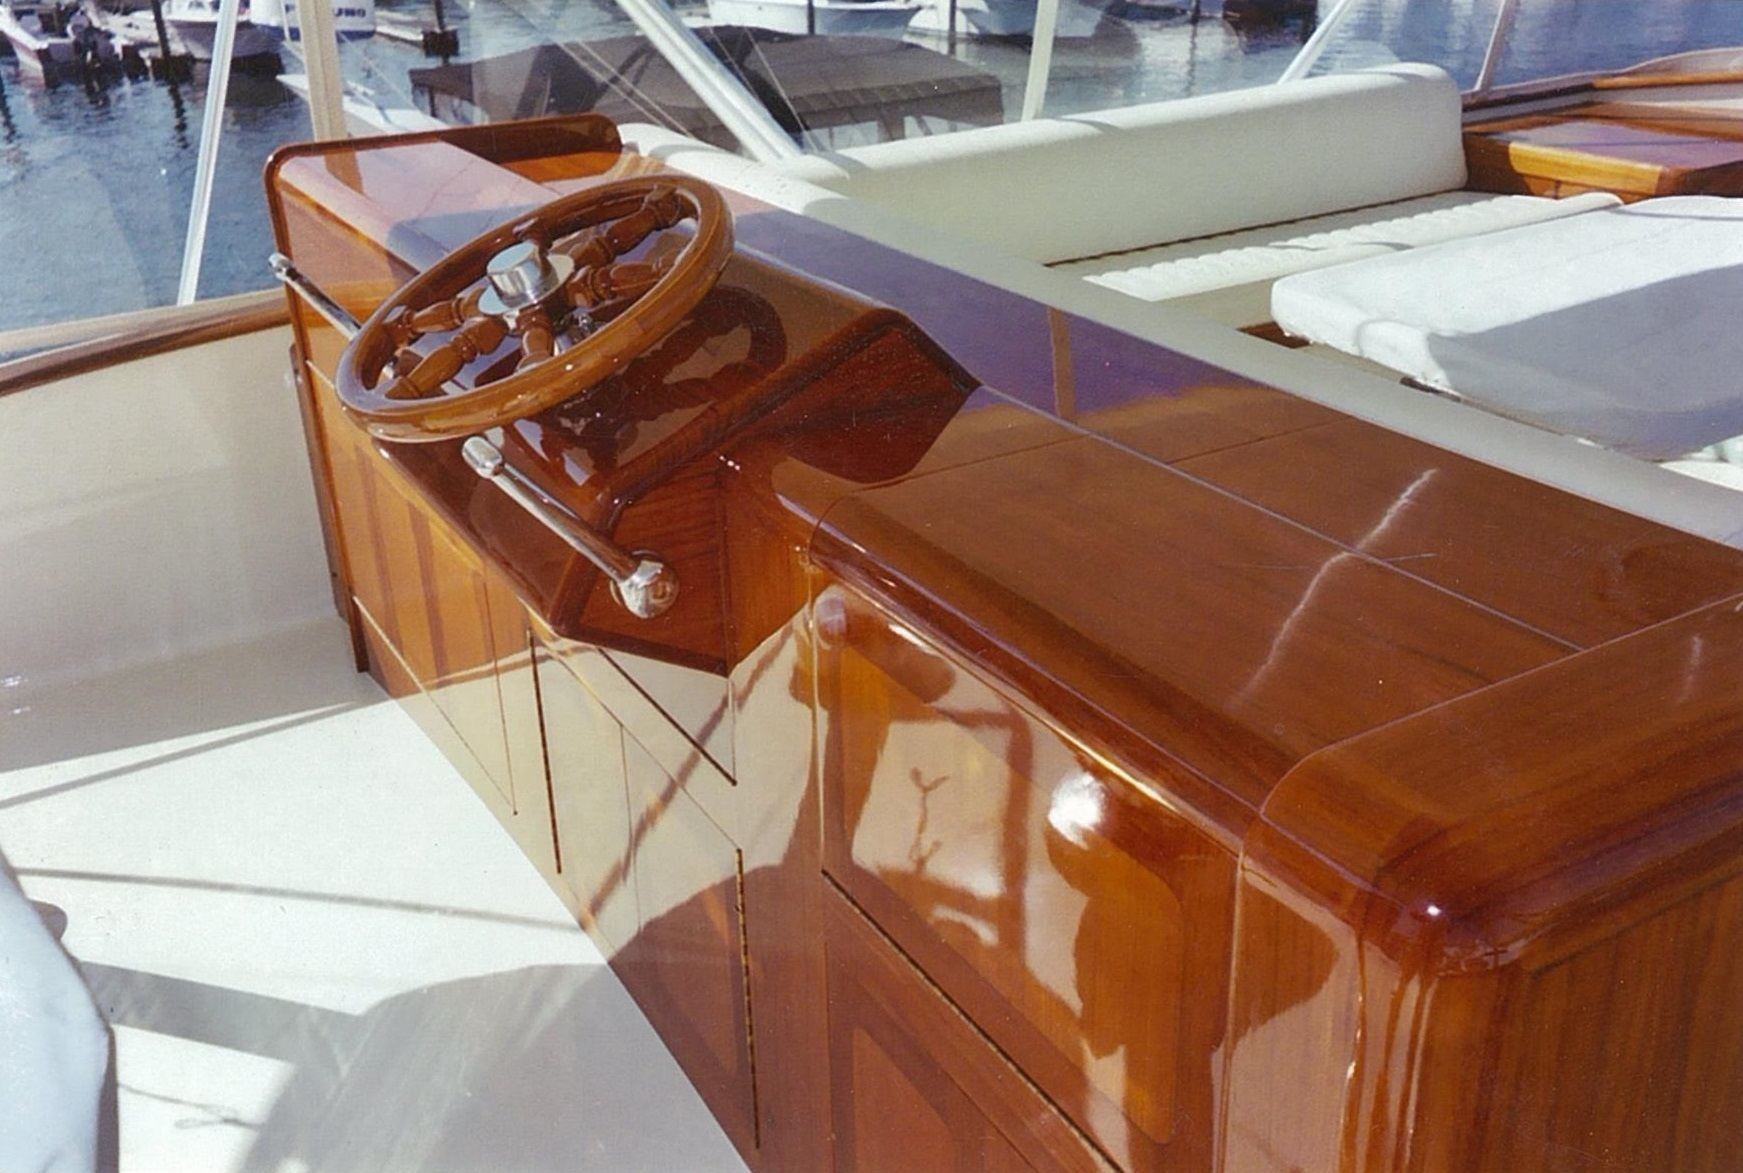 Boat steering and electronics consoles